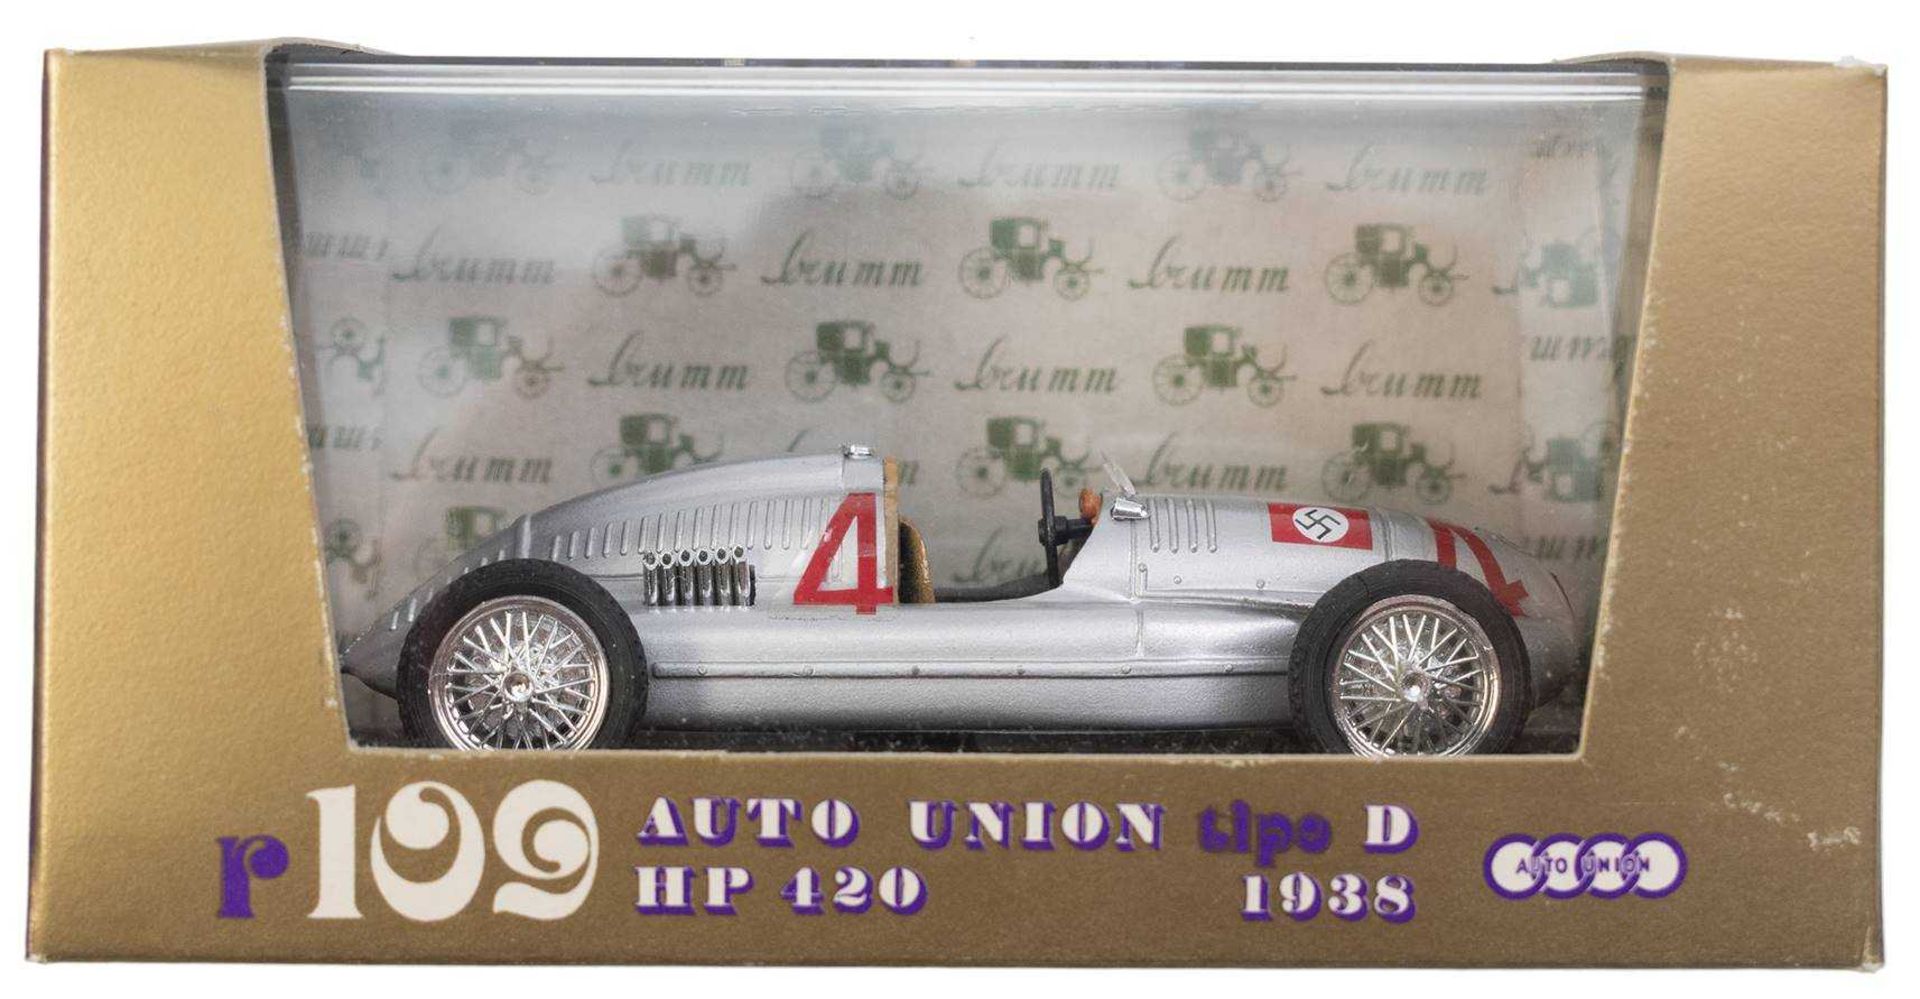 Car union tipo D HP 120 1938, silver with liftoff no. 4, in the very rare variety with swastika Deca